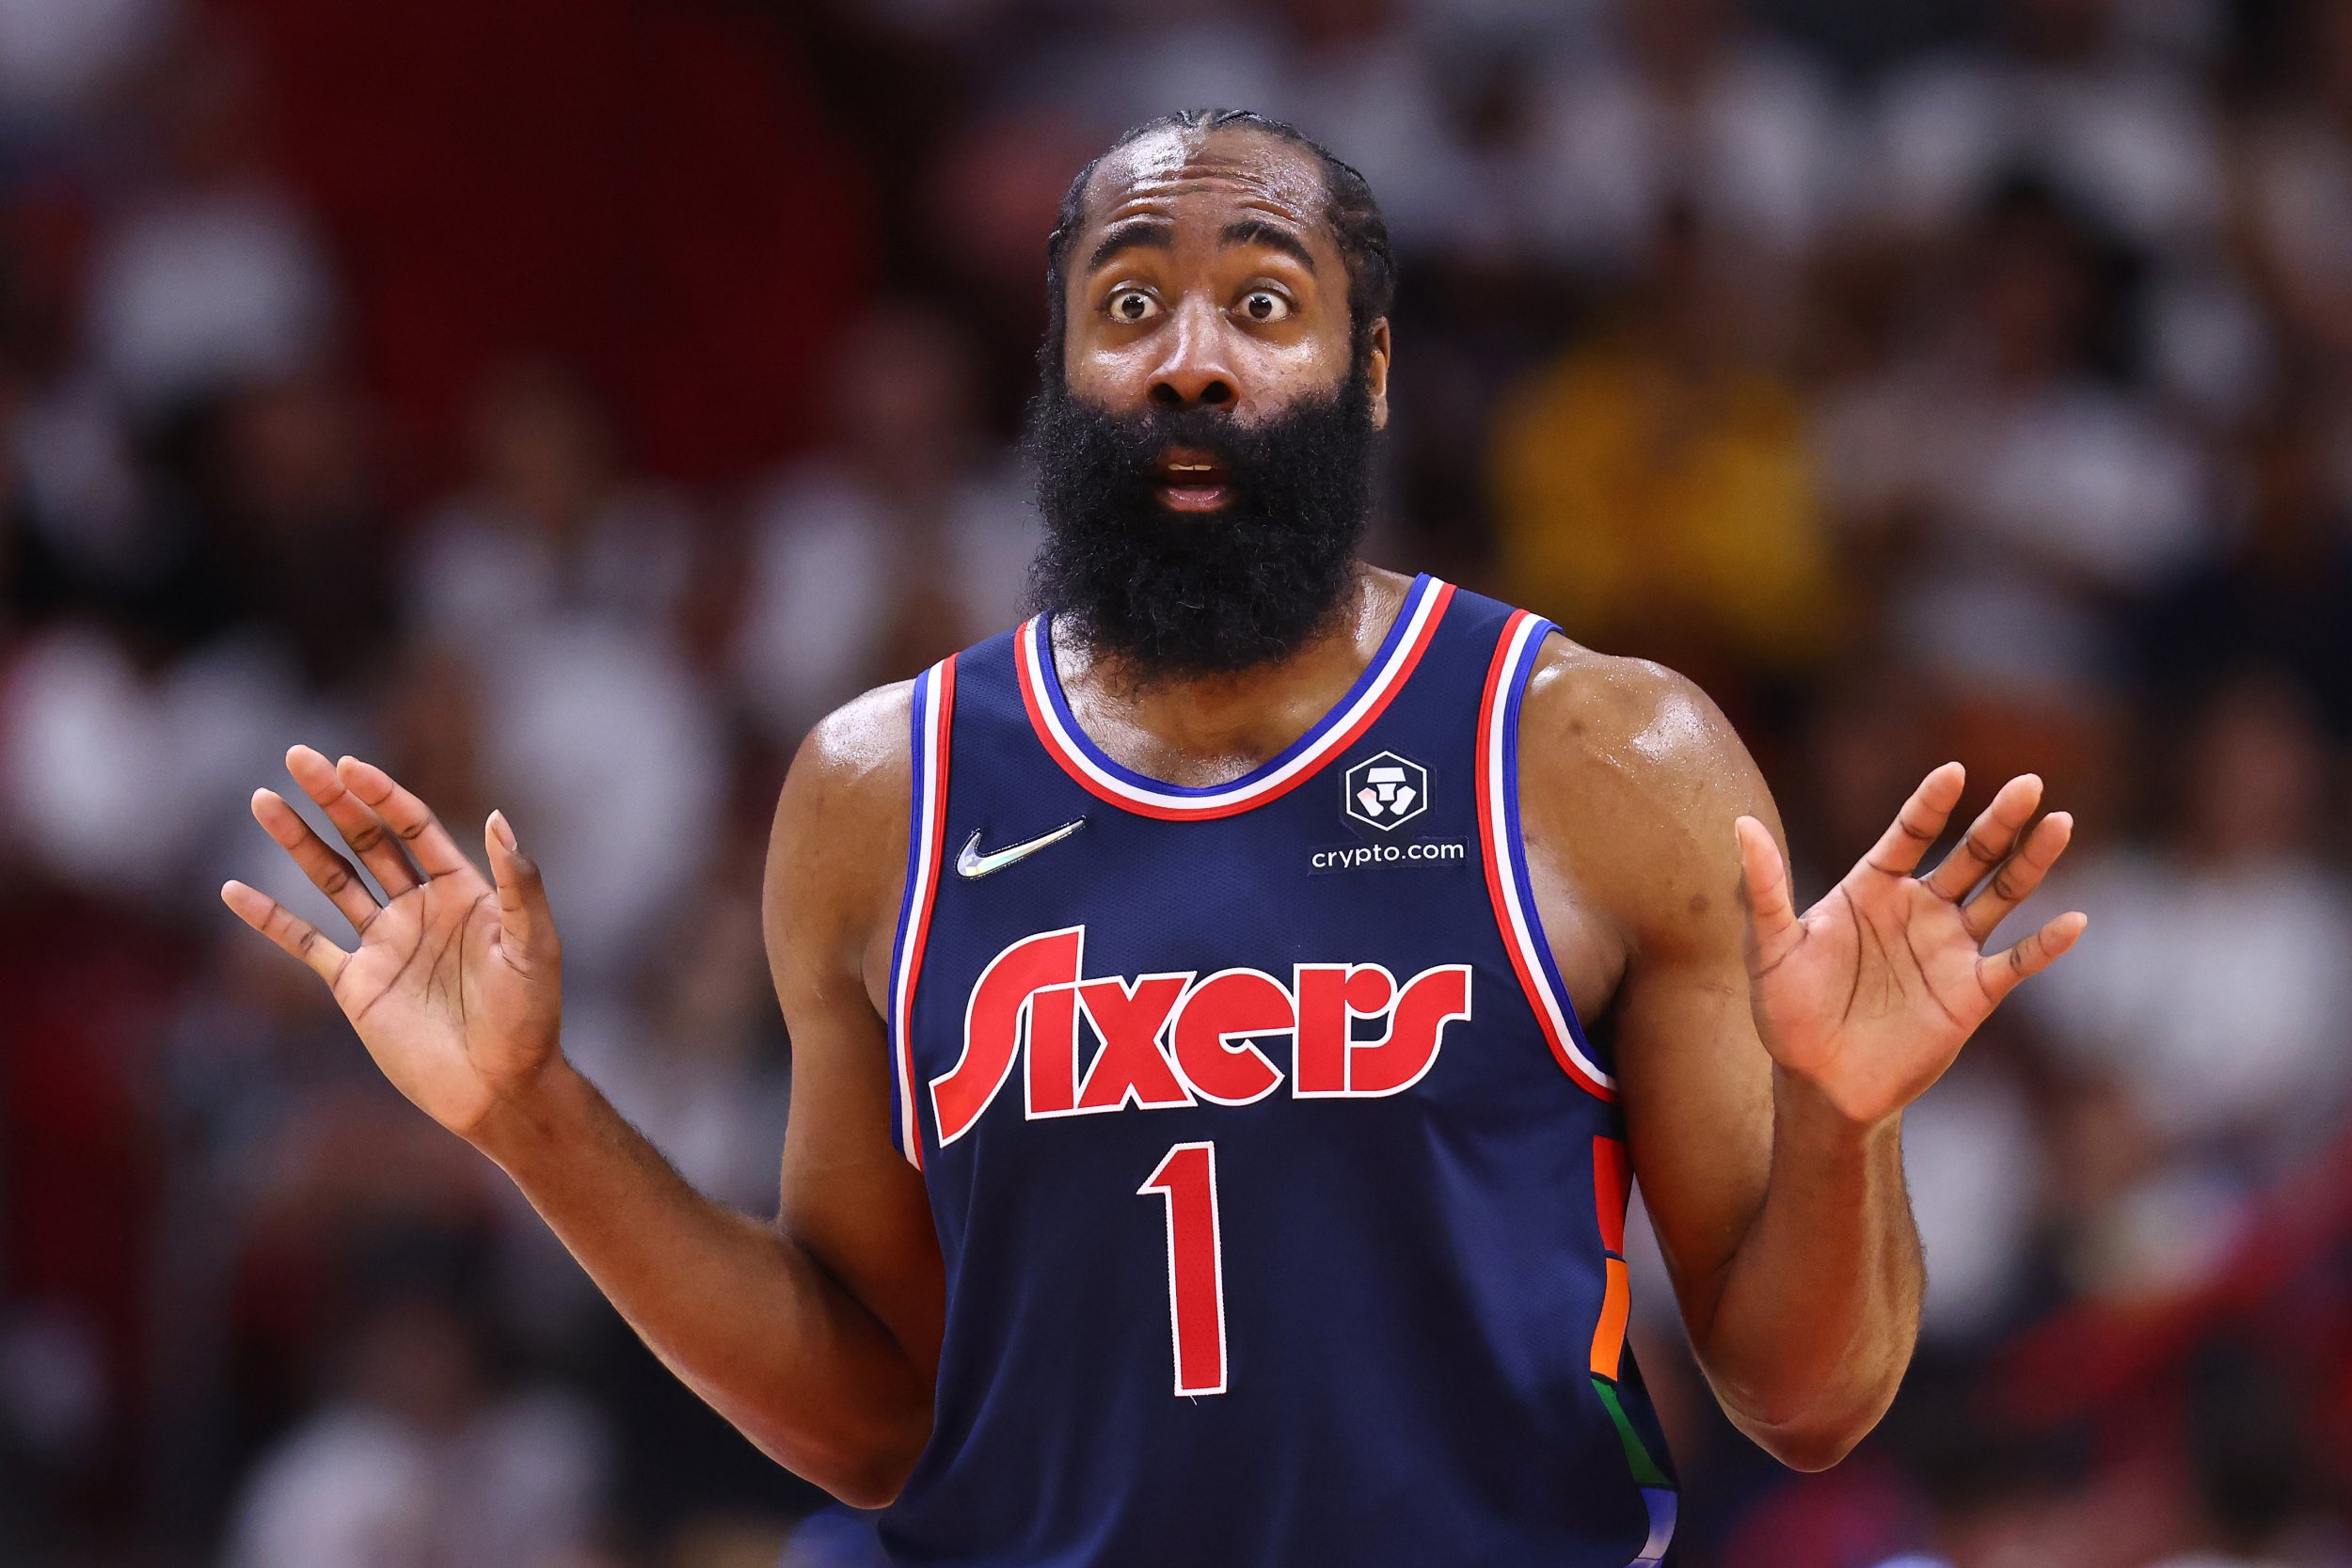 Sixers fans blame Harden, Rivers, Embiid for playoff loss